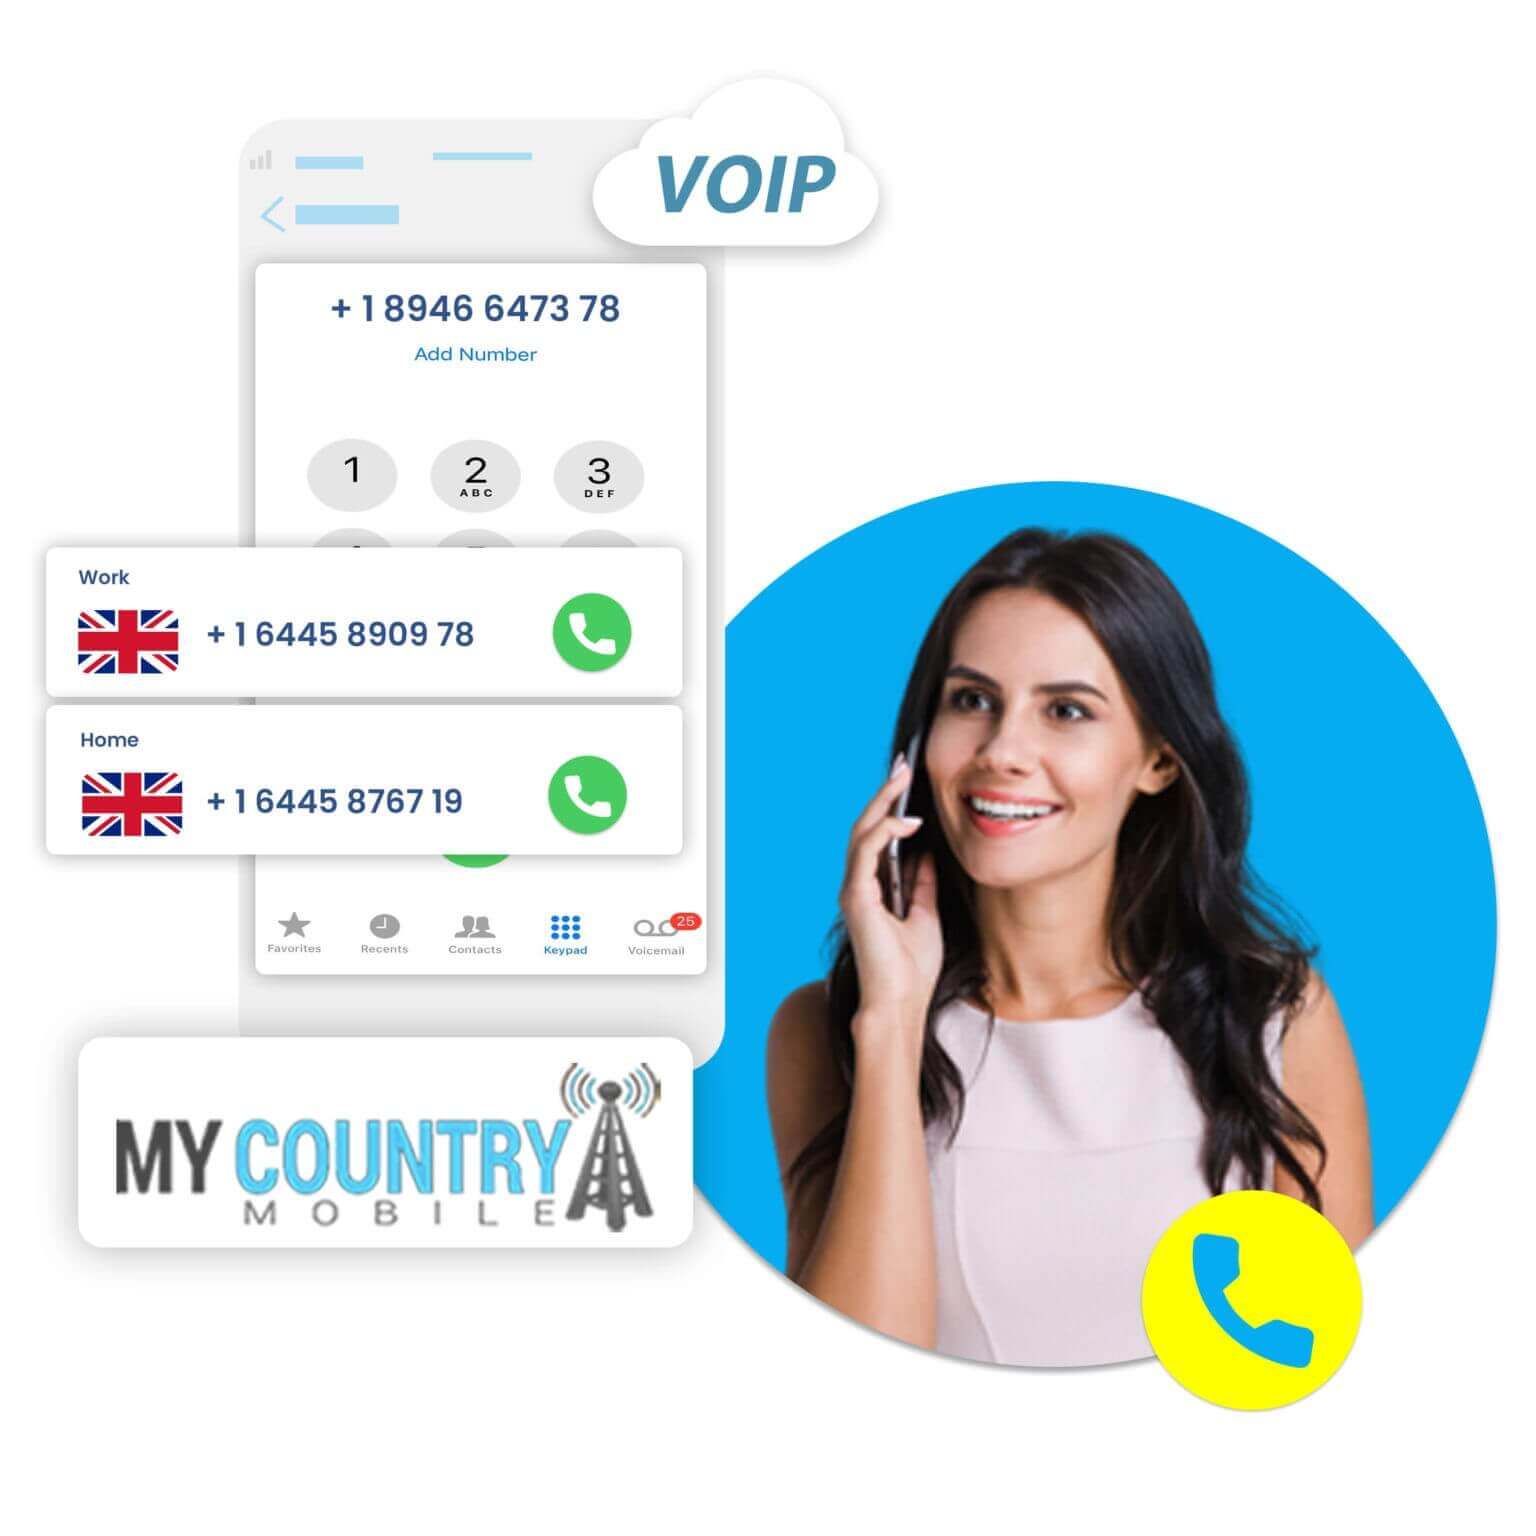 voip-solutions-1536x1536-1 (1)